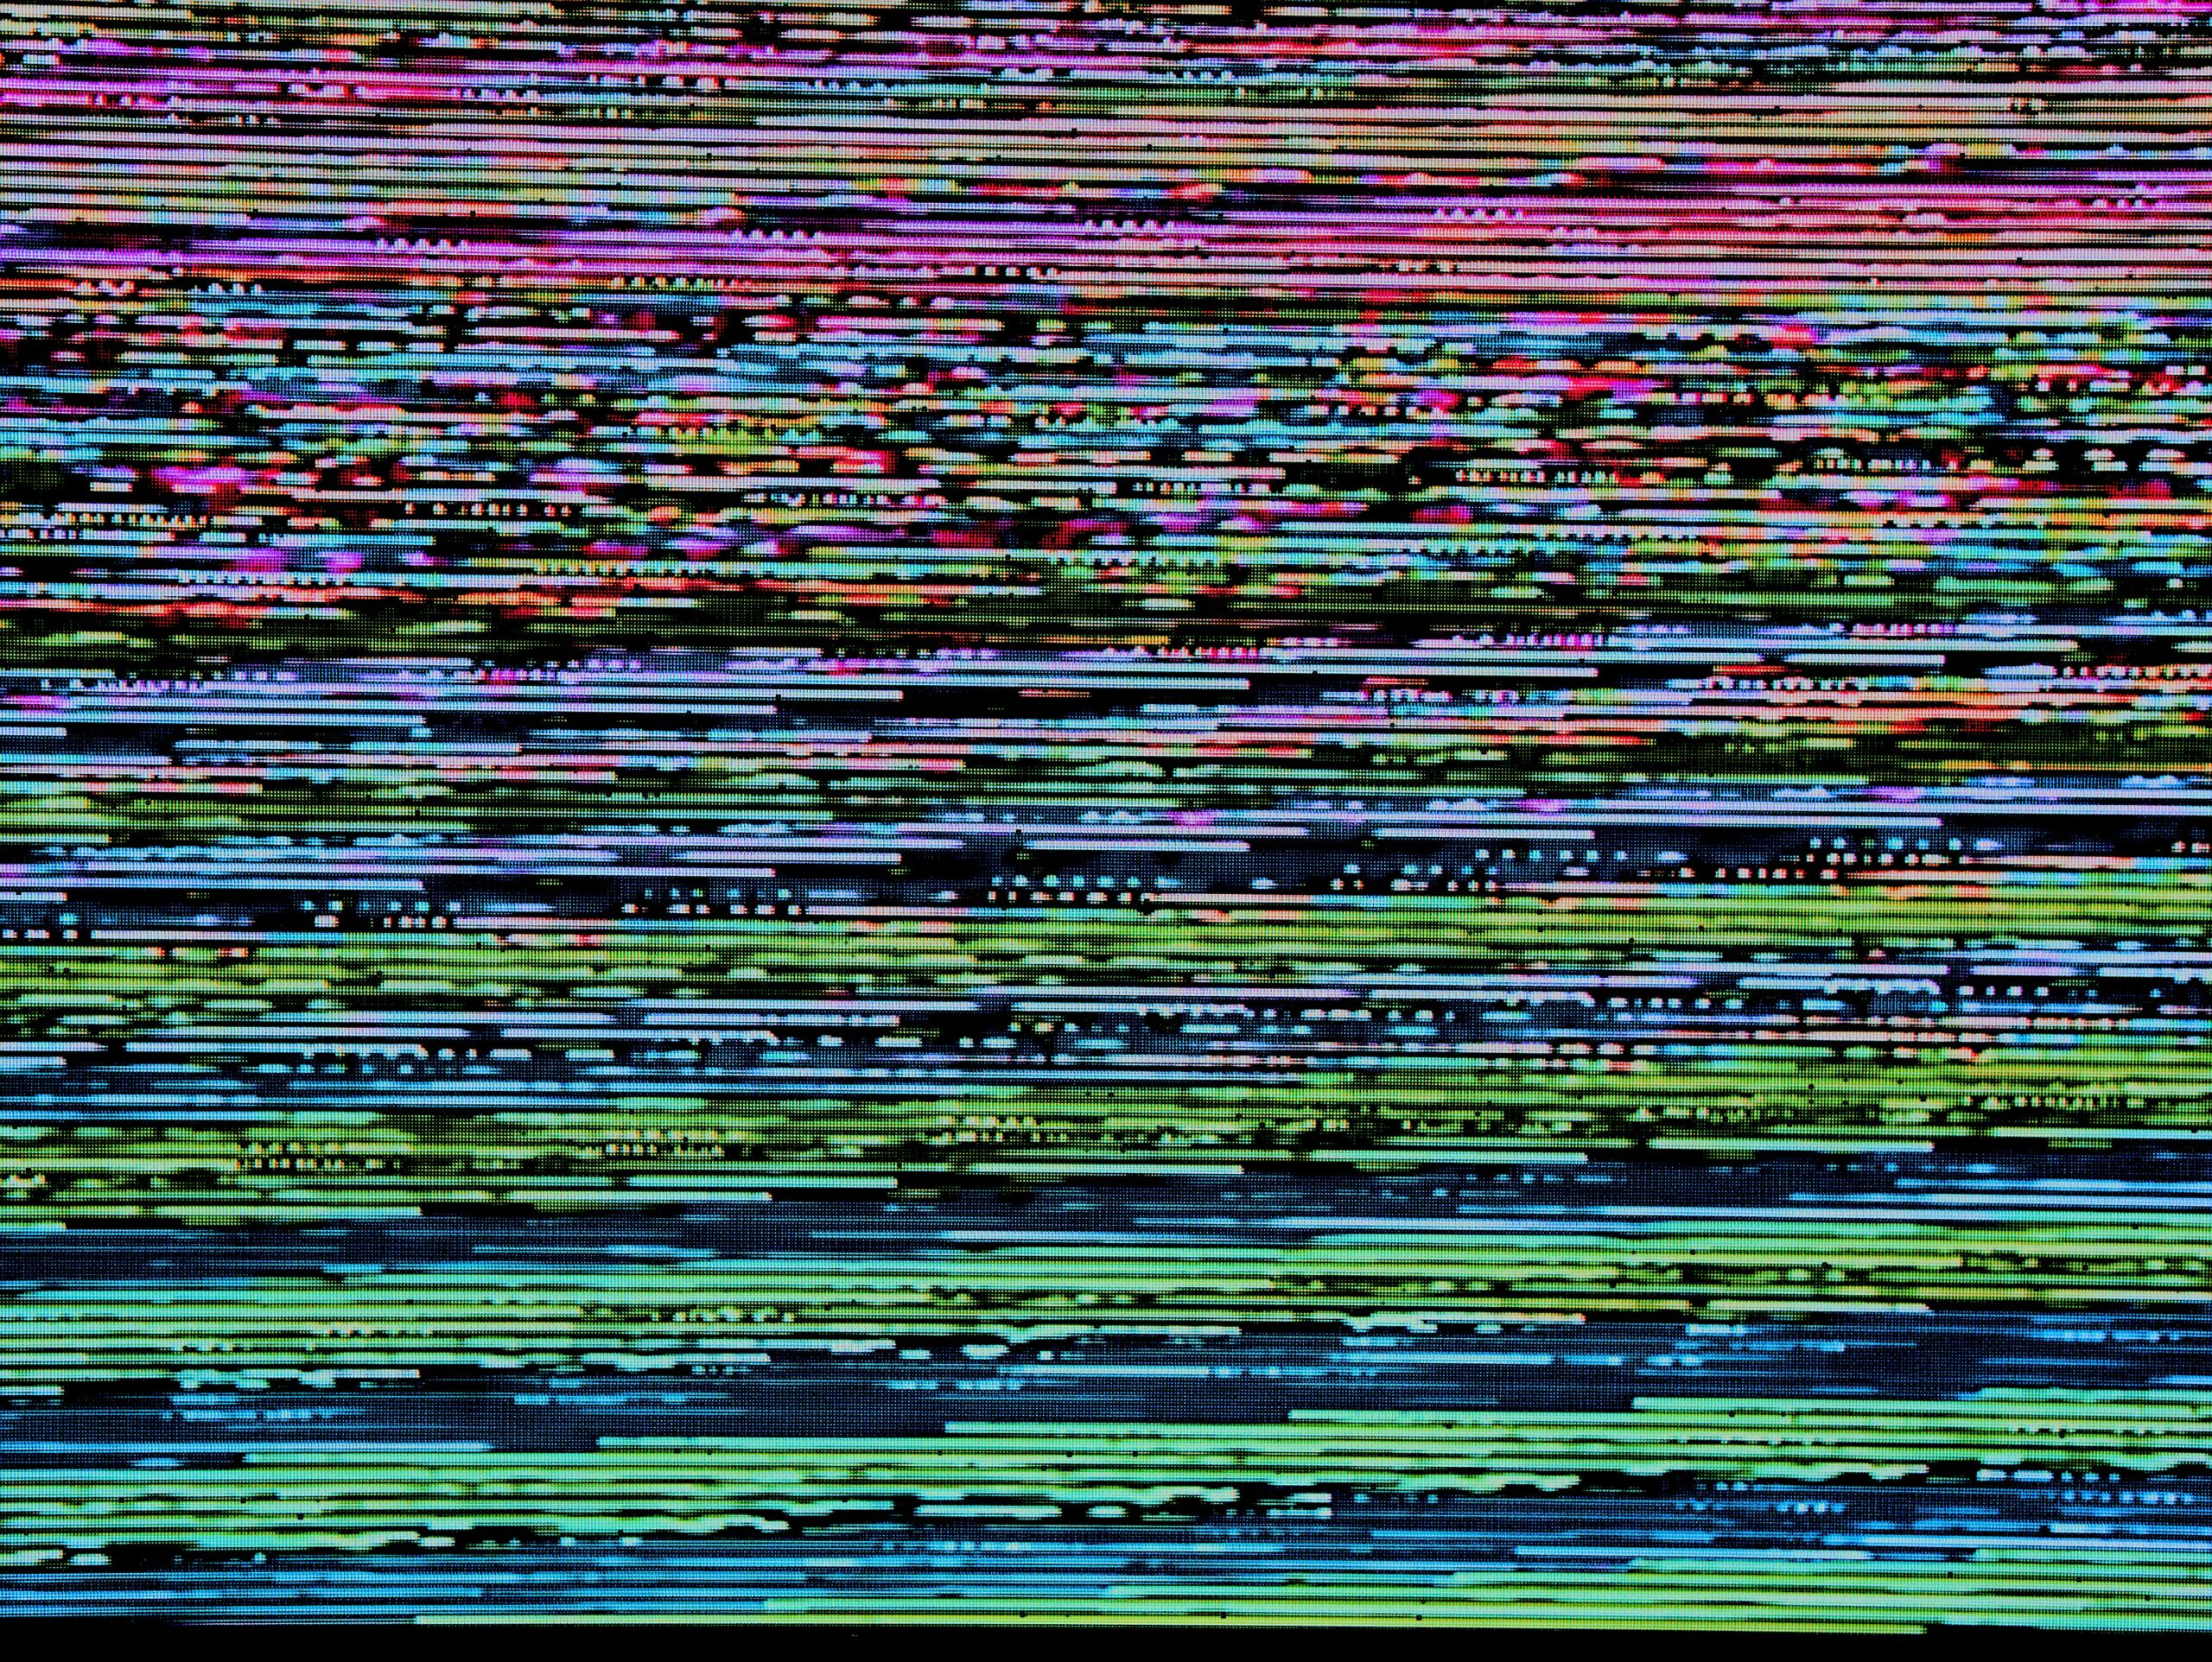 A glitch on the screen which is an example of science fiction censorship.